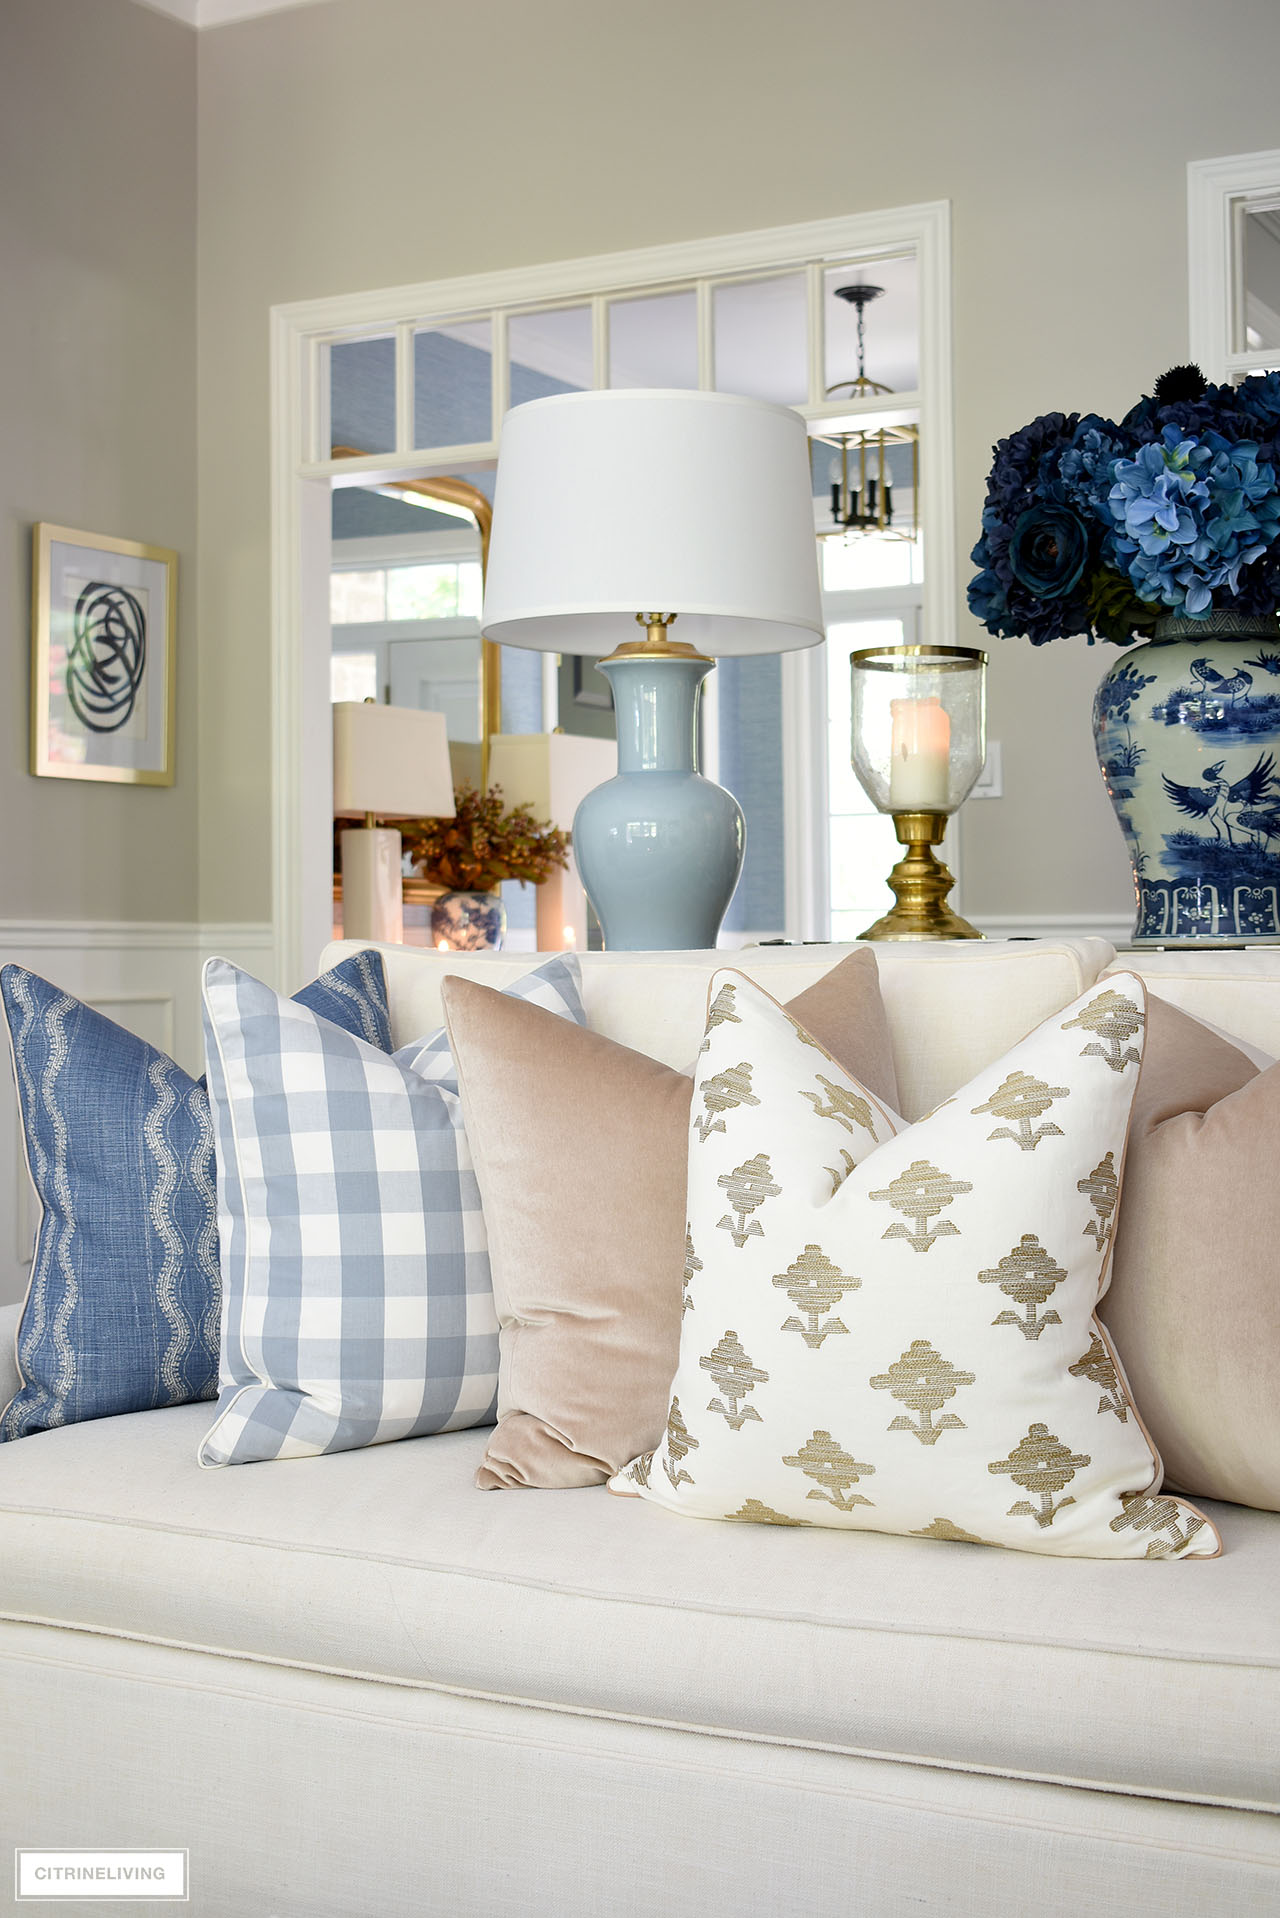 Sofa styled with luxe pillows in blue, tan and ivory